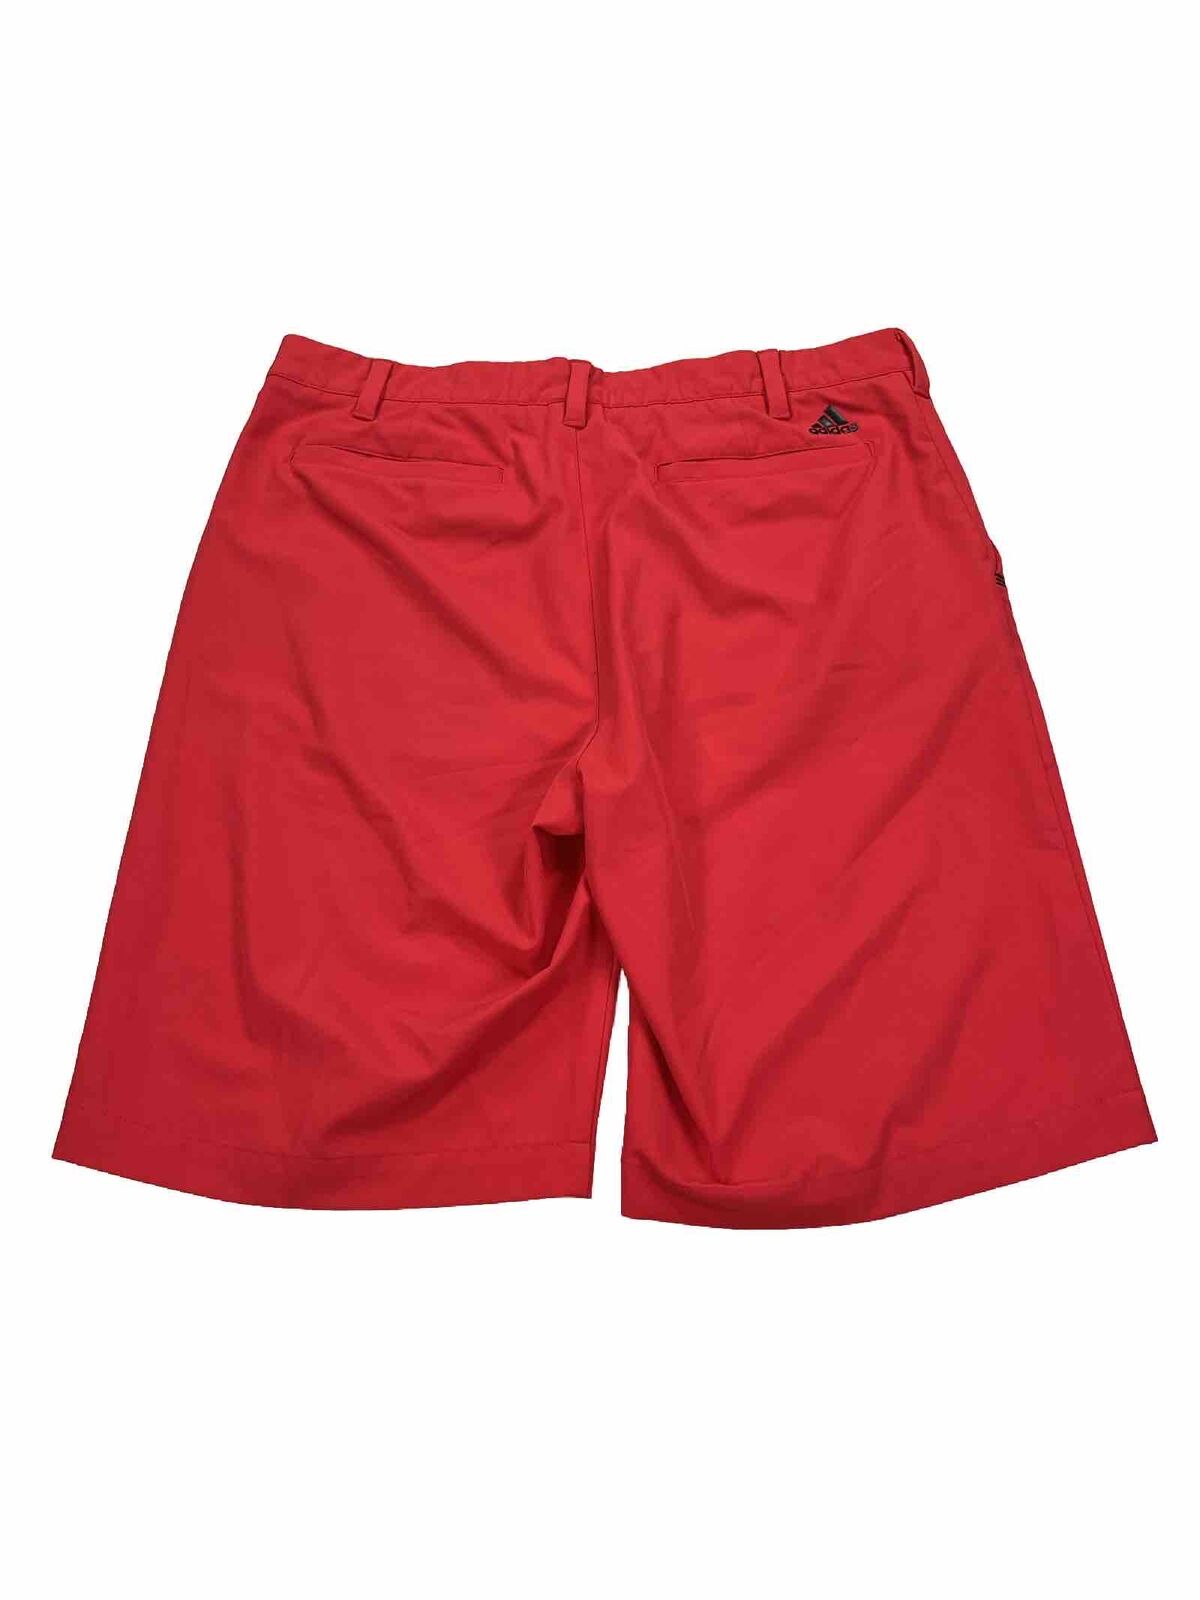 adidas Men's Red Polyester Stretch Golf Shorts - 30